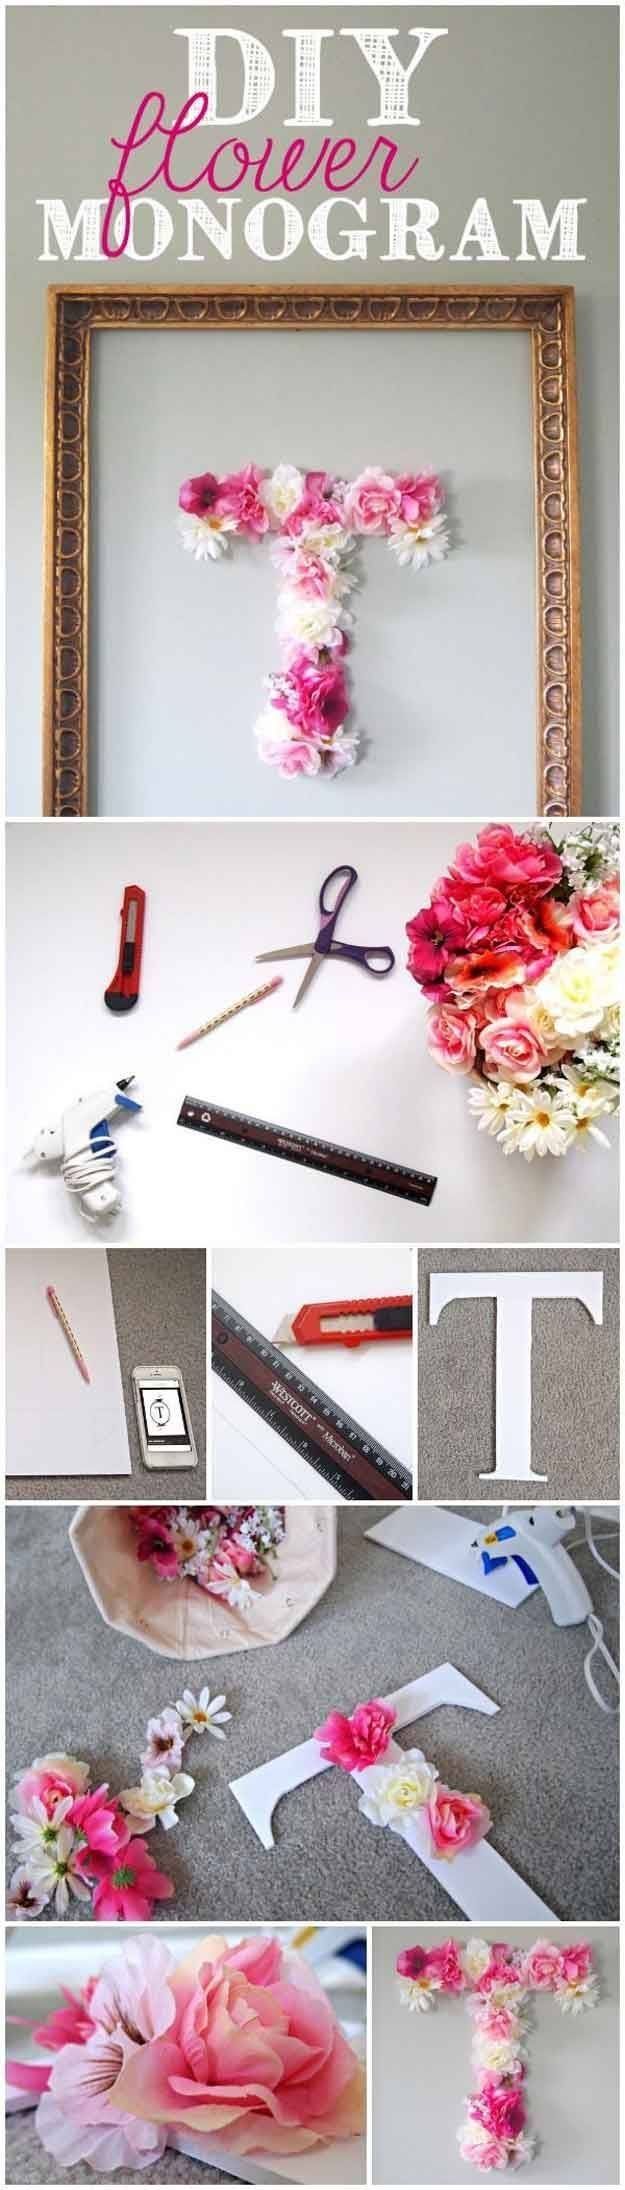 Best 25+ Teen Wall Art Ideas On Pinterest | Teen Wall Decor With Regard To Most Recently Released Teenage Wall Art (View 2 of 30)